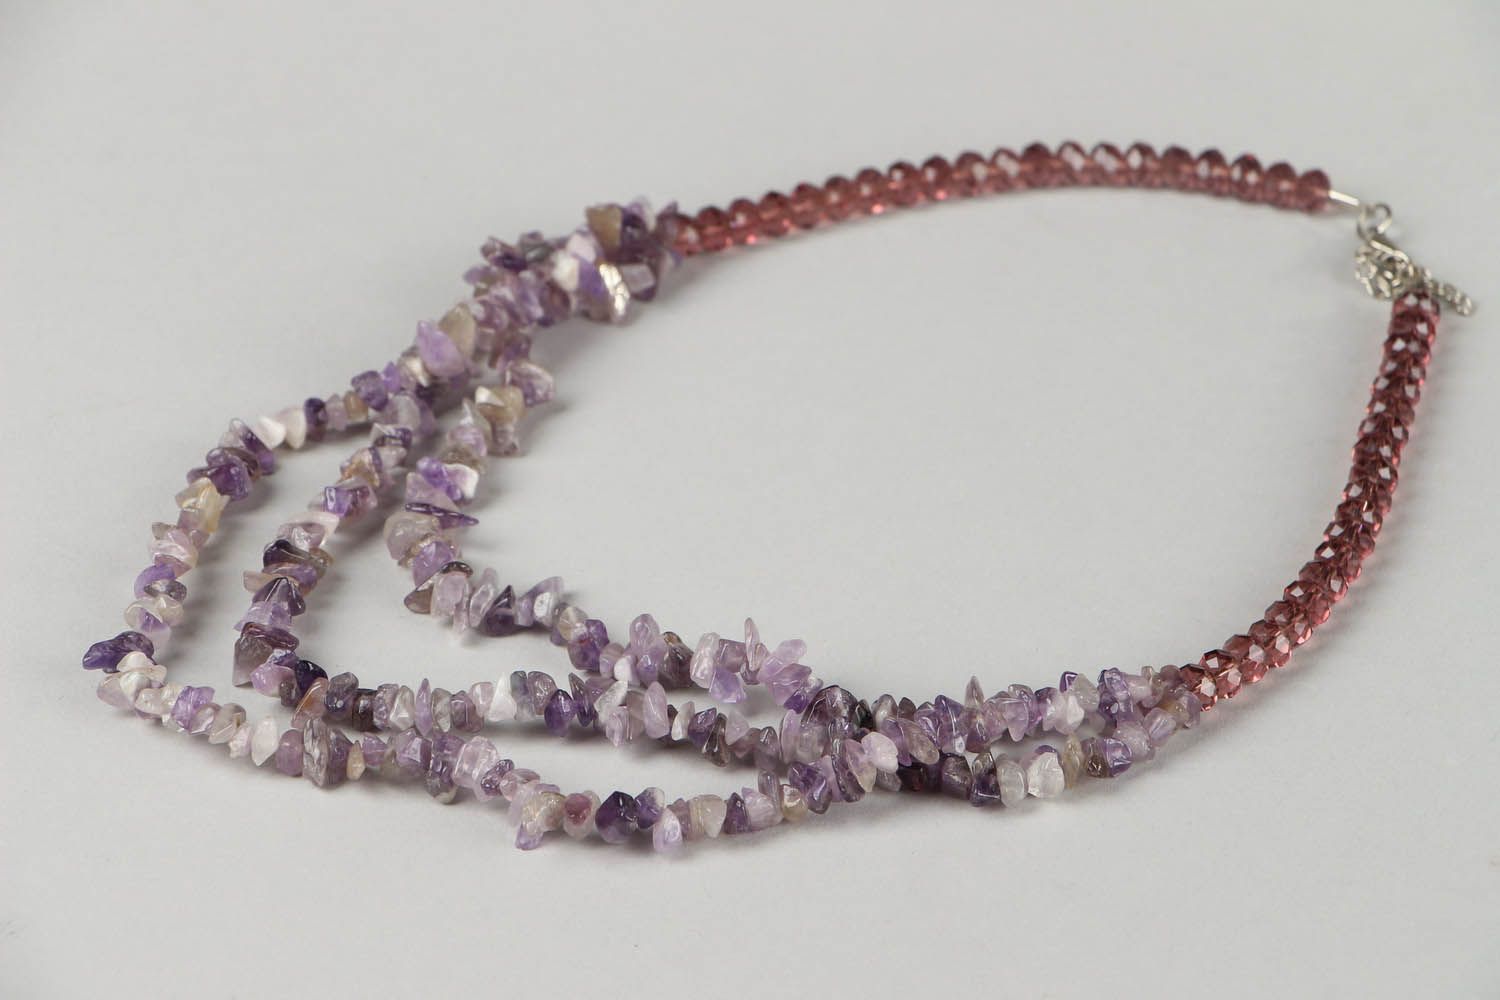 Bead necklace made of amethyst and glass photo 2